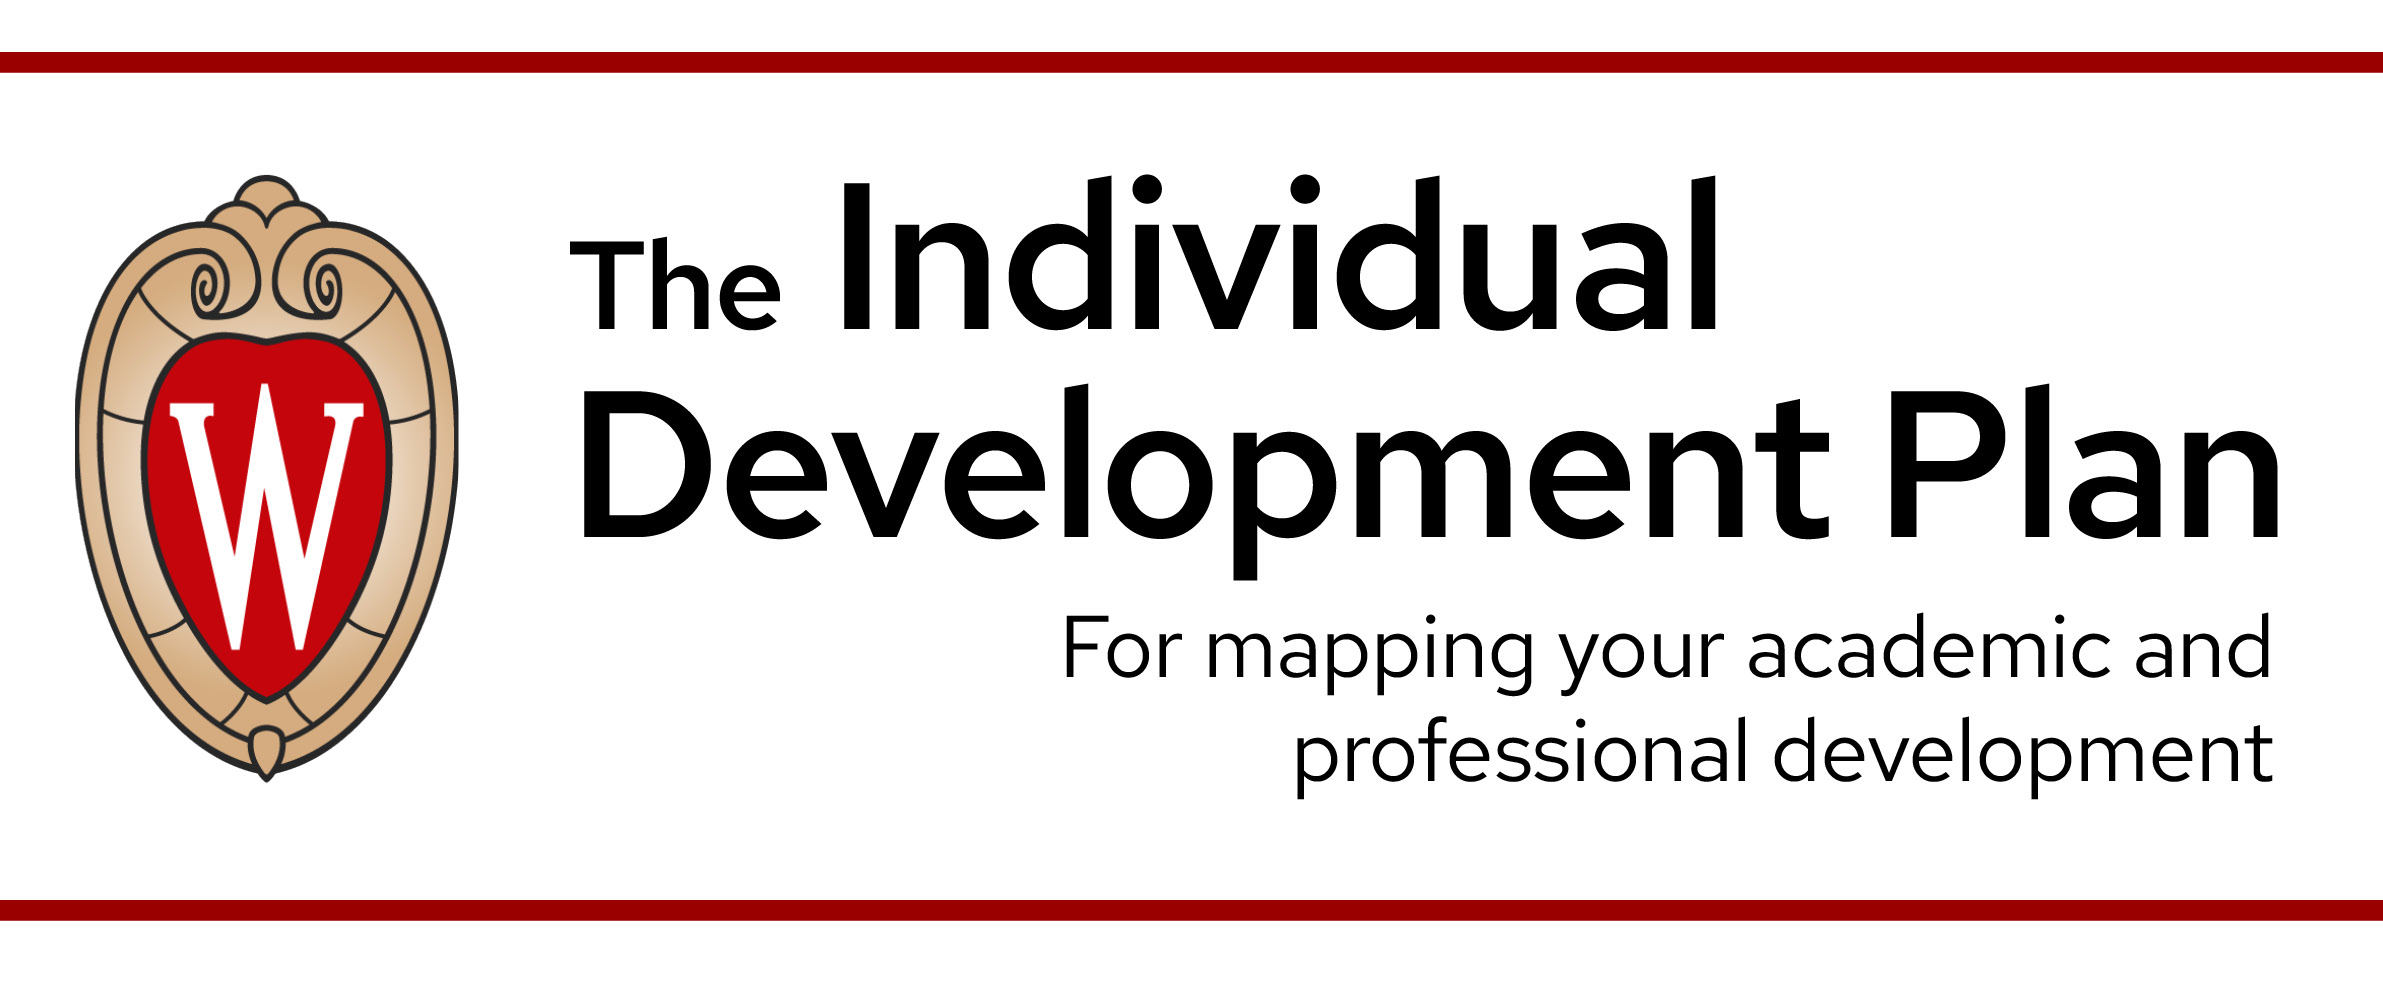 UW crest with text: The Individual Development Plan for mapping your academic and professional development.